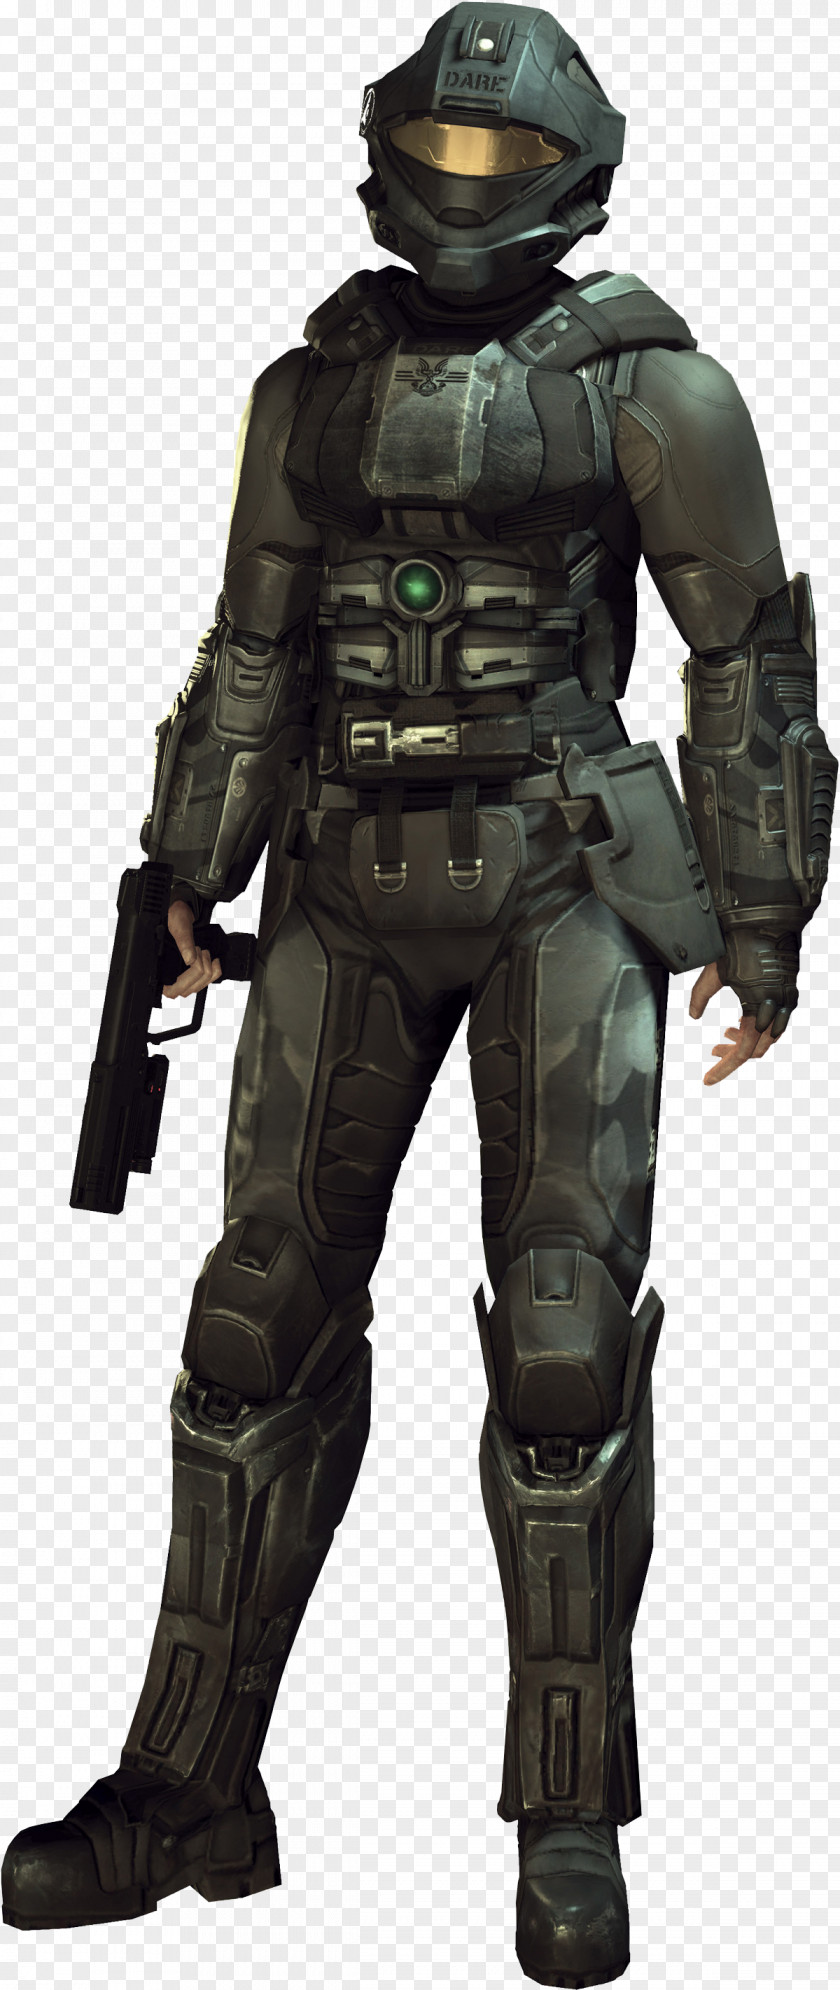 Dare Halo 3: ODST Halo: Reach Combat Evolved 4 PNG